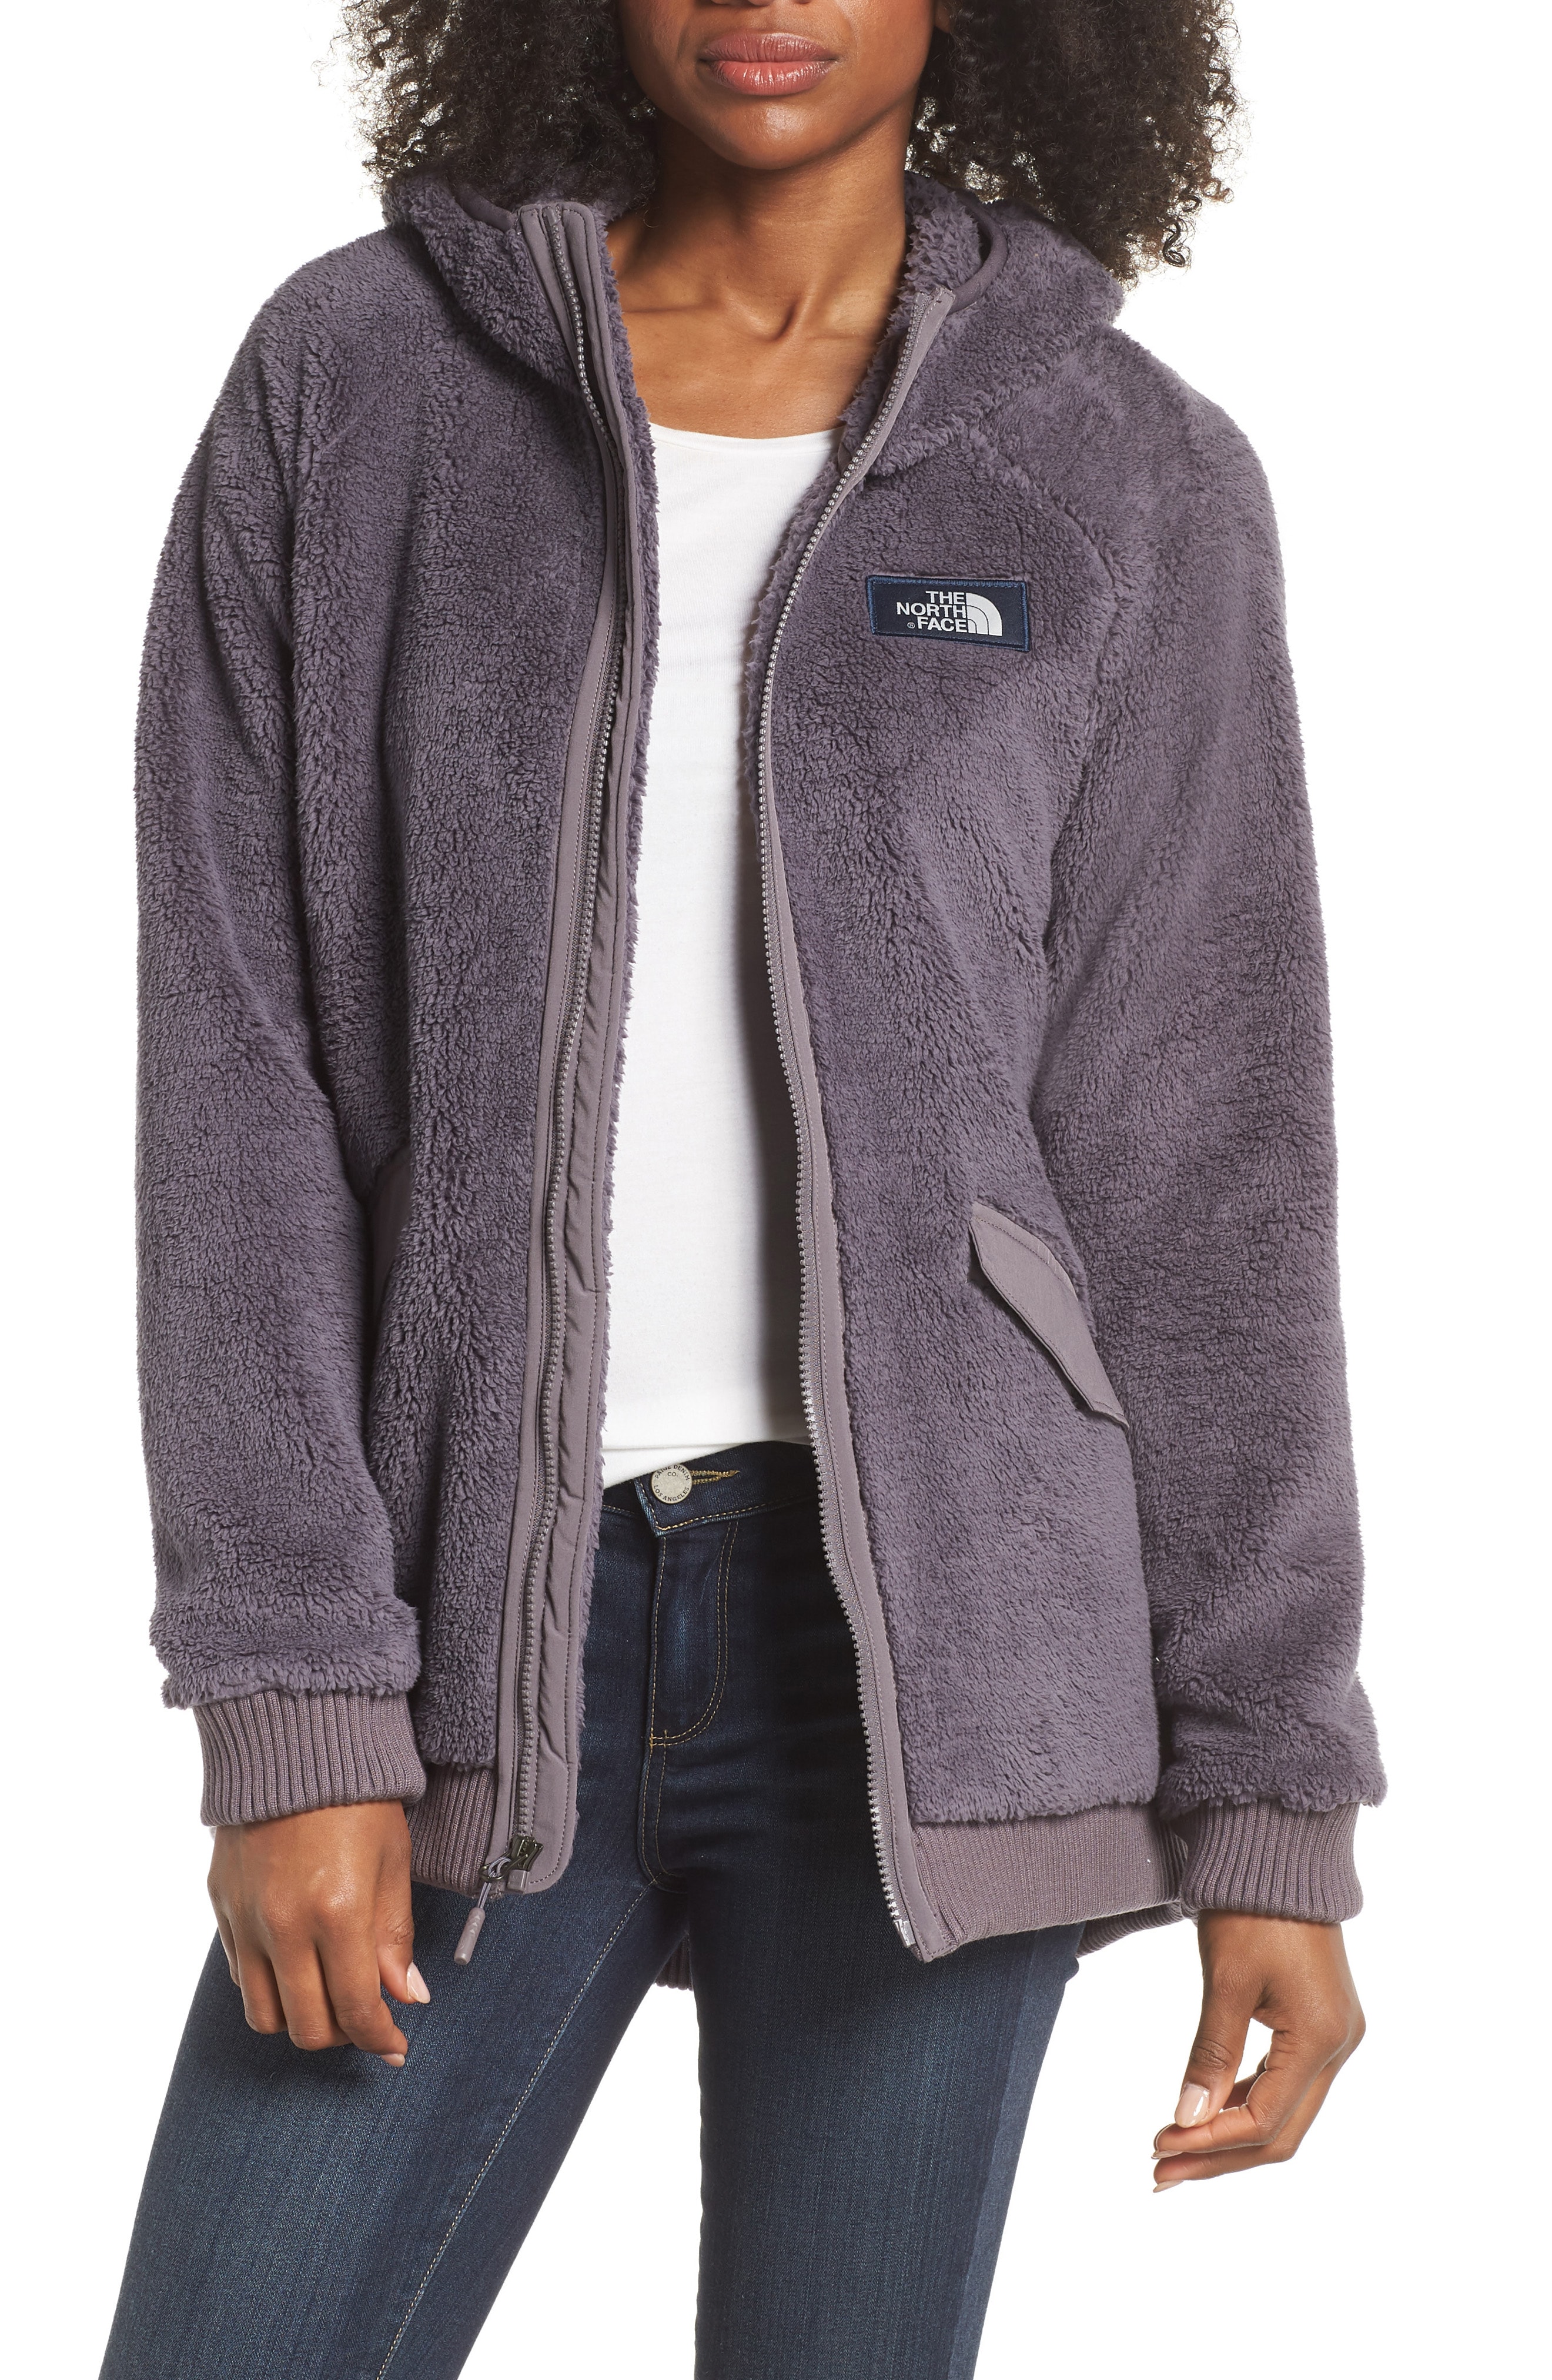 The North Face Campshire Bomber Jacket